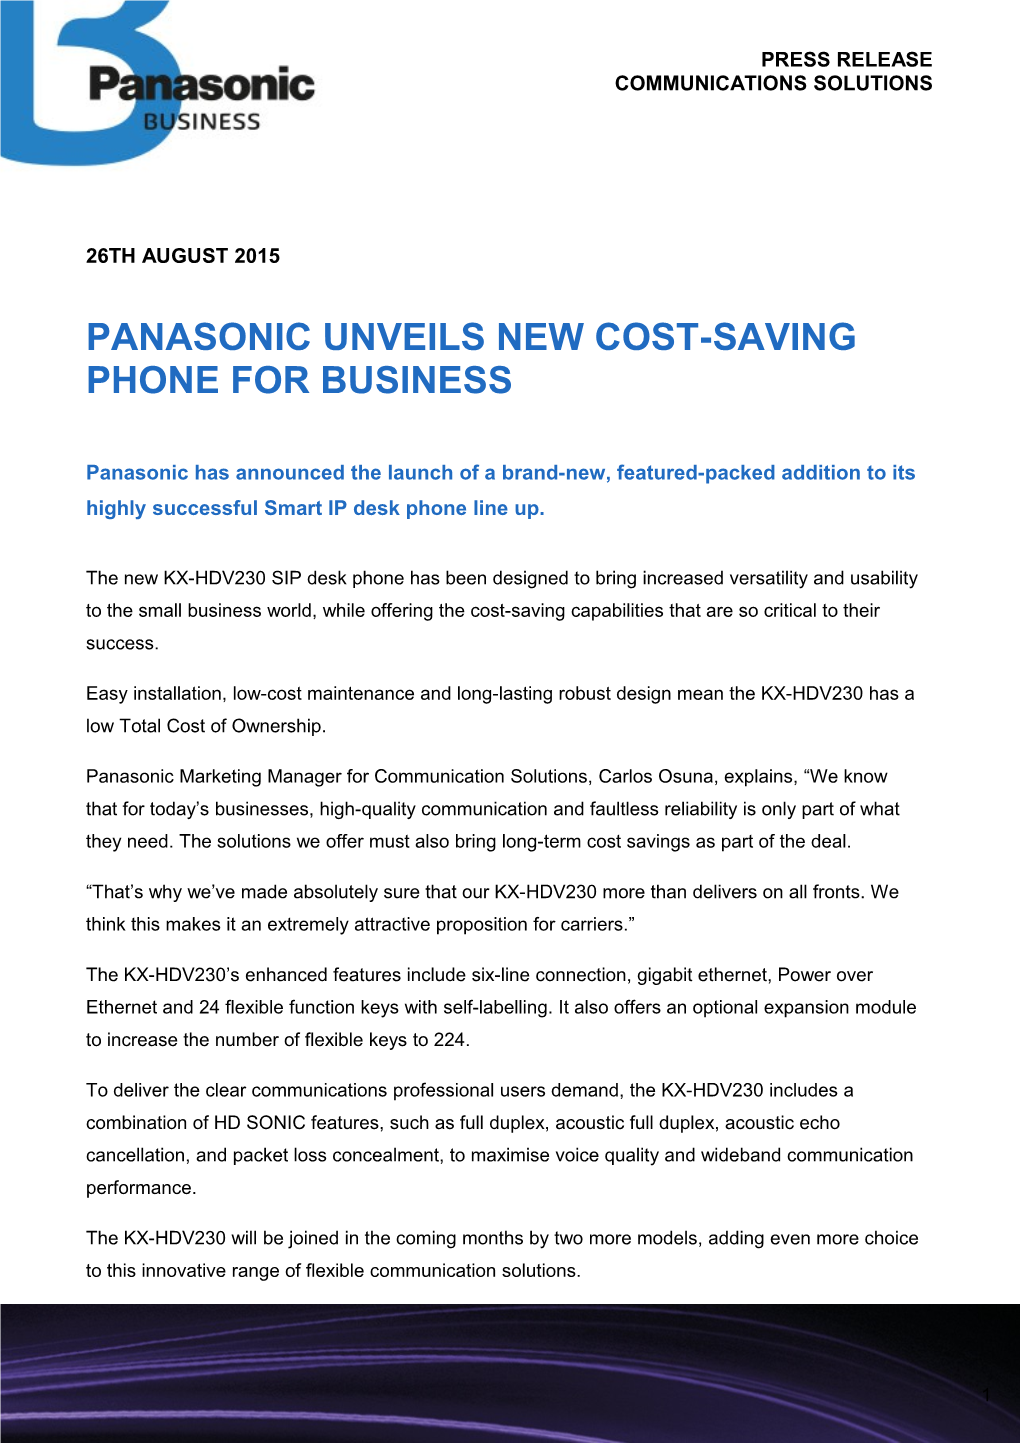 Panasonic Unveils New Cost-Saving Phone for Business